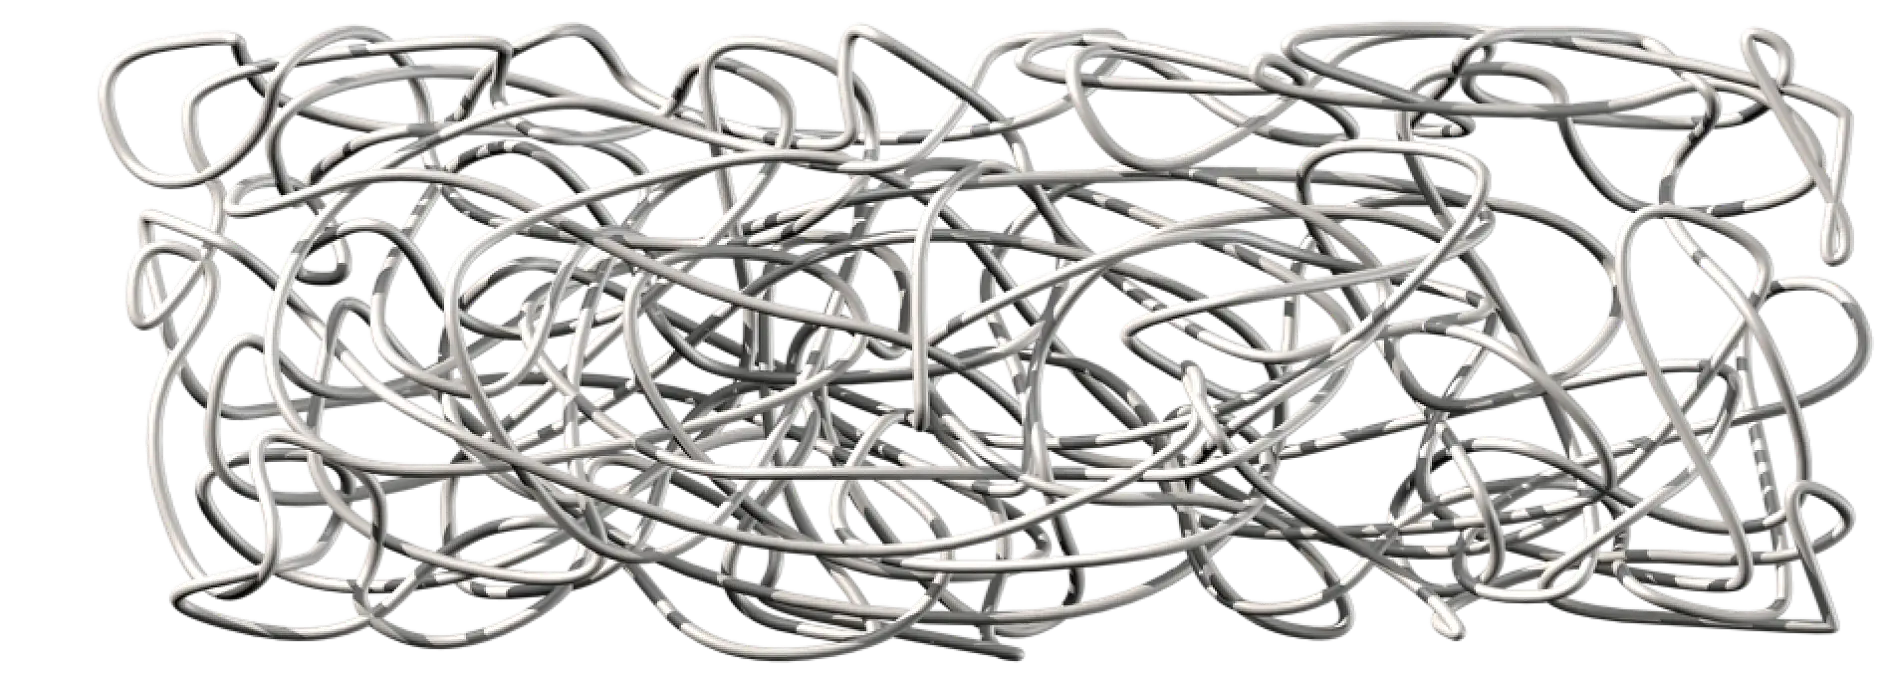 Natural rubber consists of extremely long polymer chains that are entangled, not connected